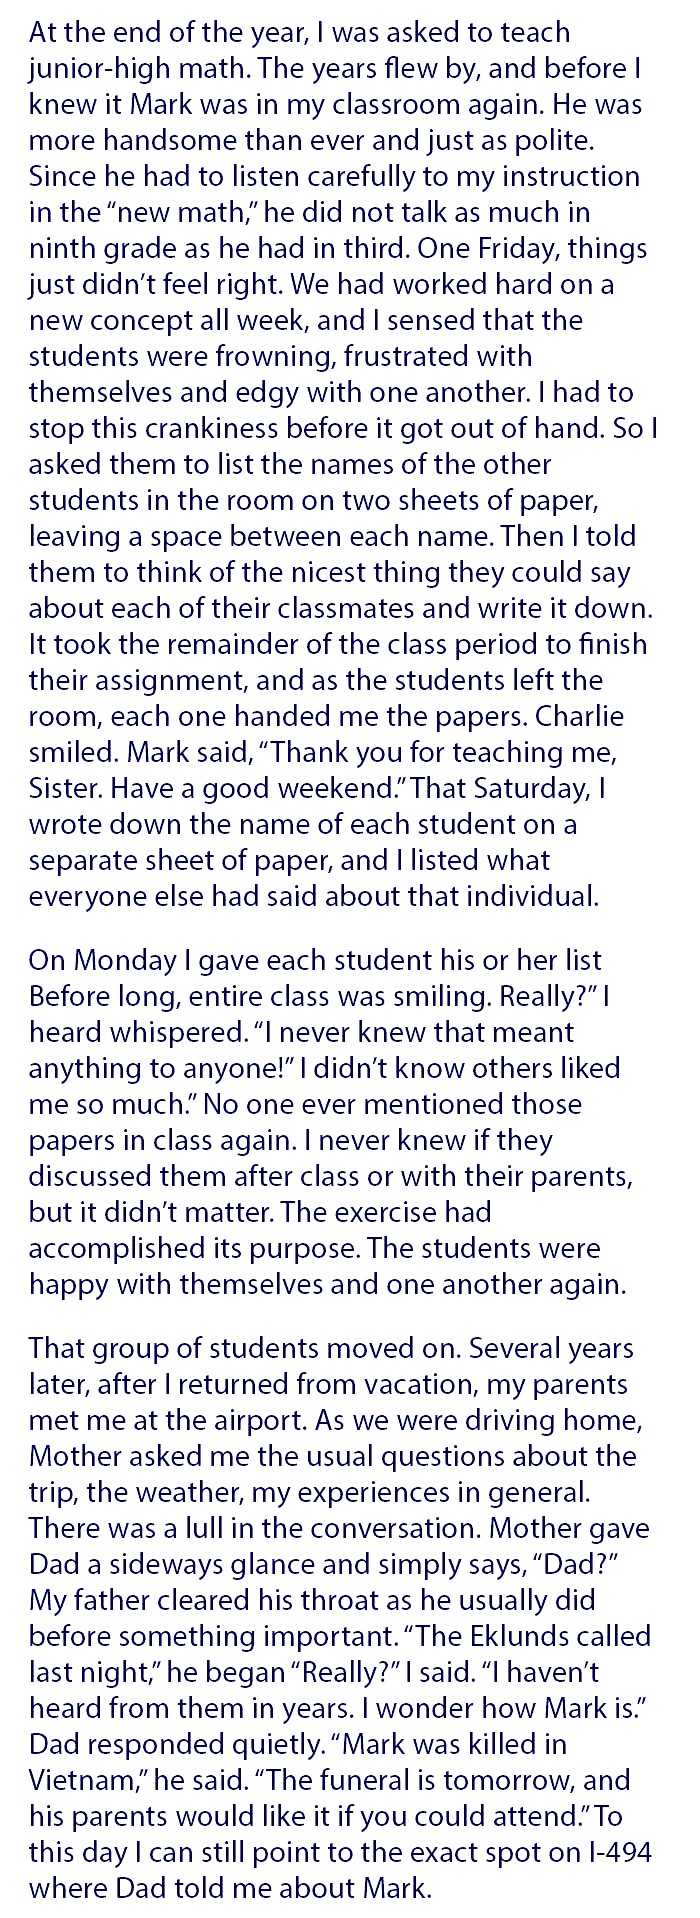 This Teacher Discovered About Her Student's Problem When He Keep Talking In The Class Non-stop.